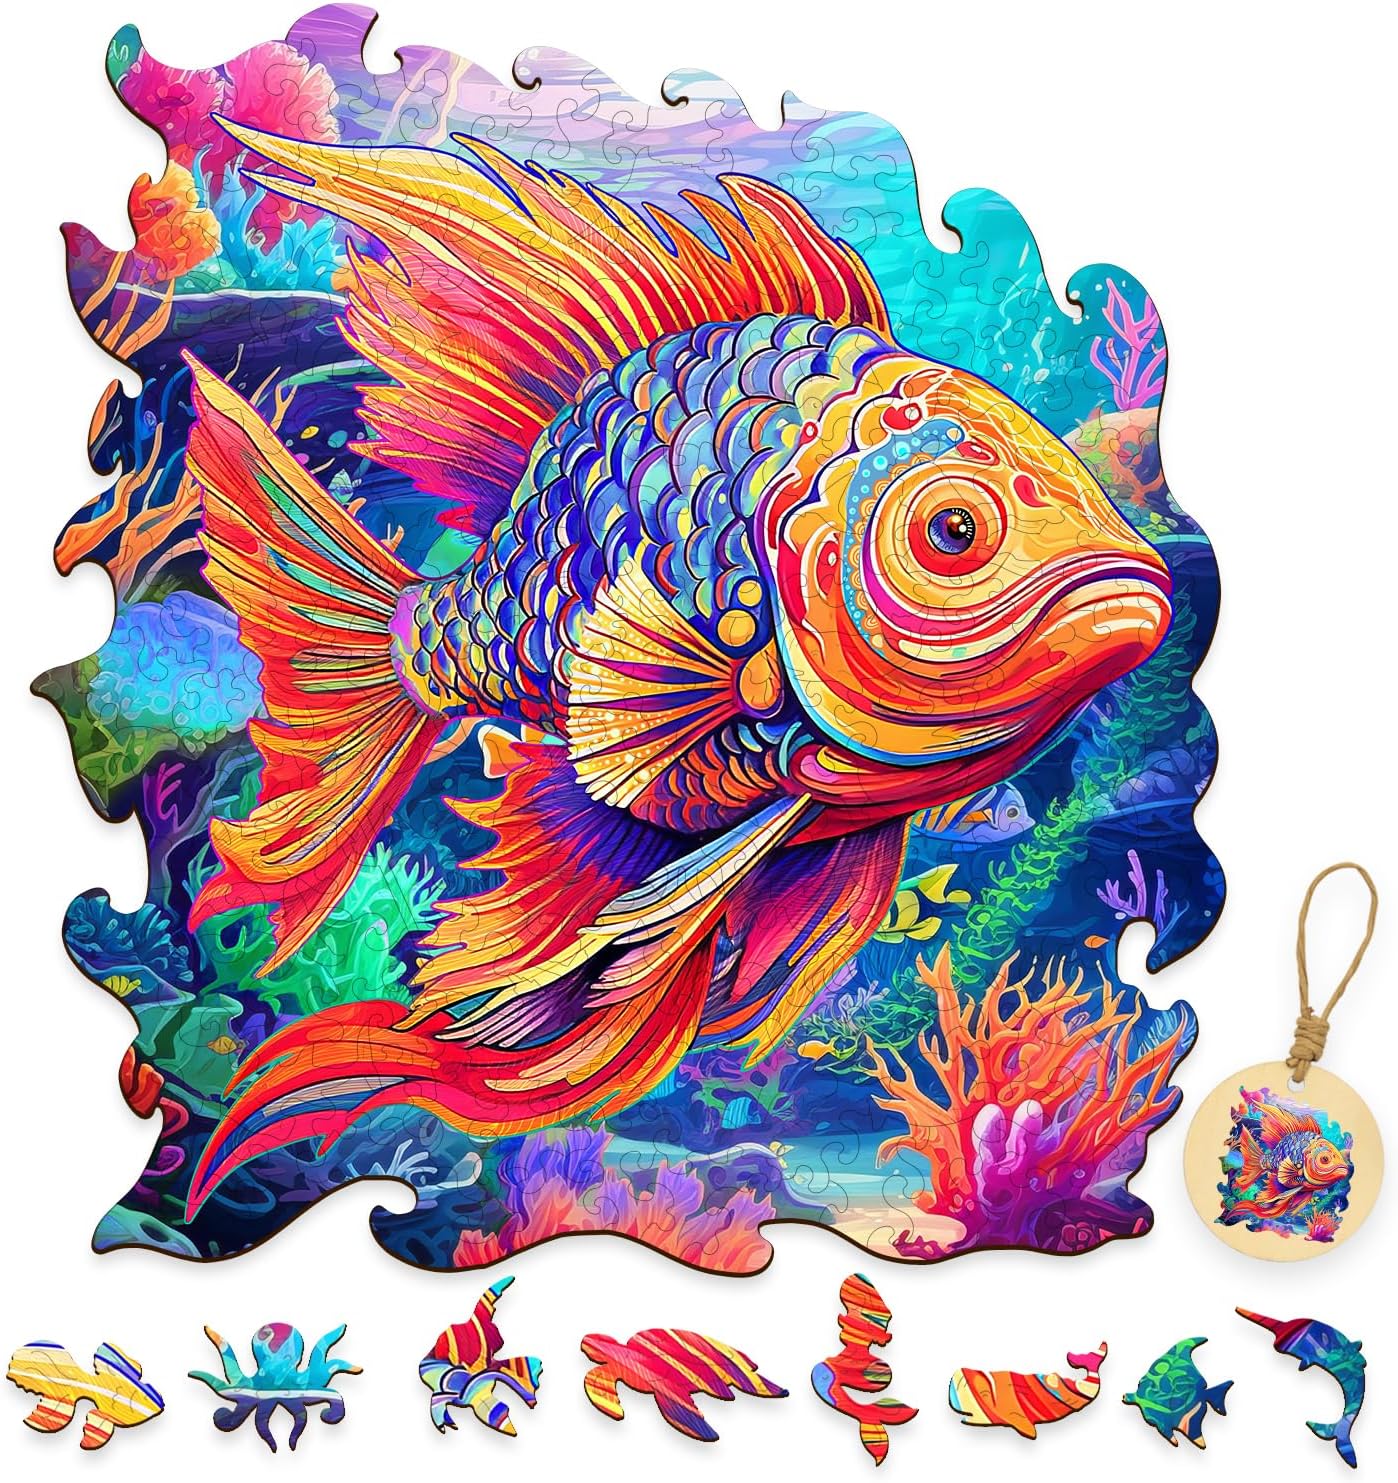 Fish wooden jigsaw puzzles